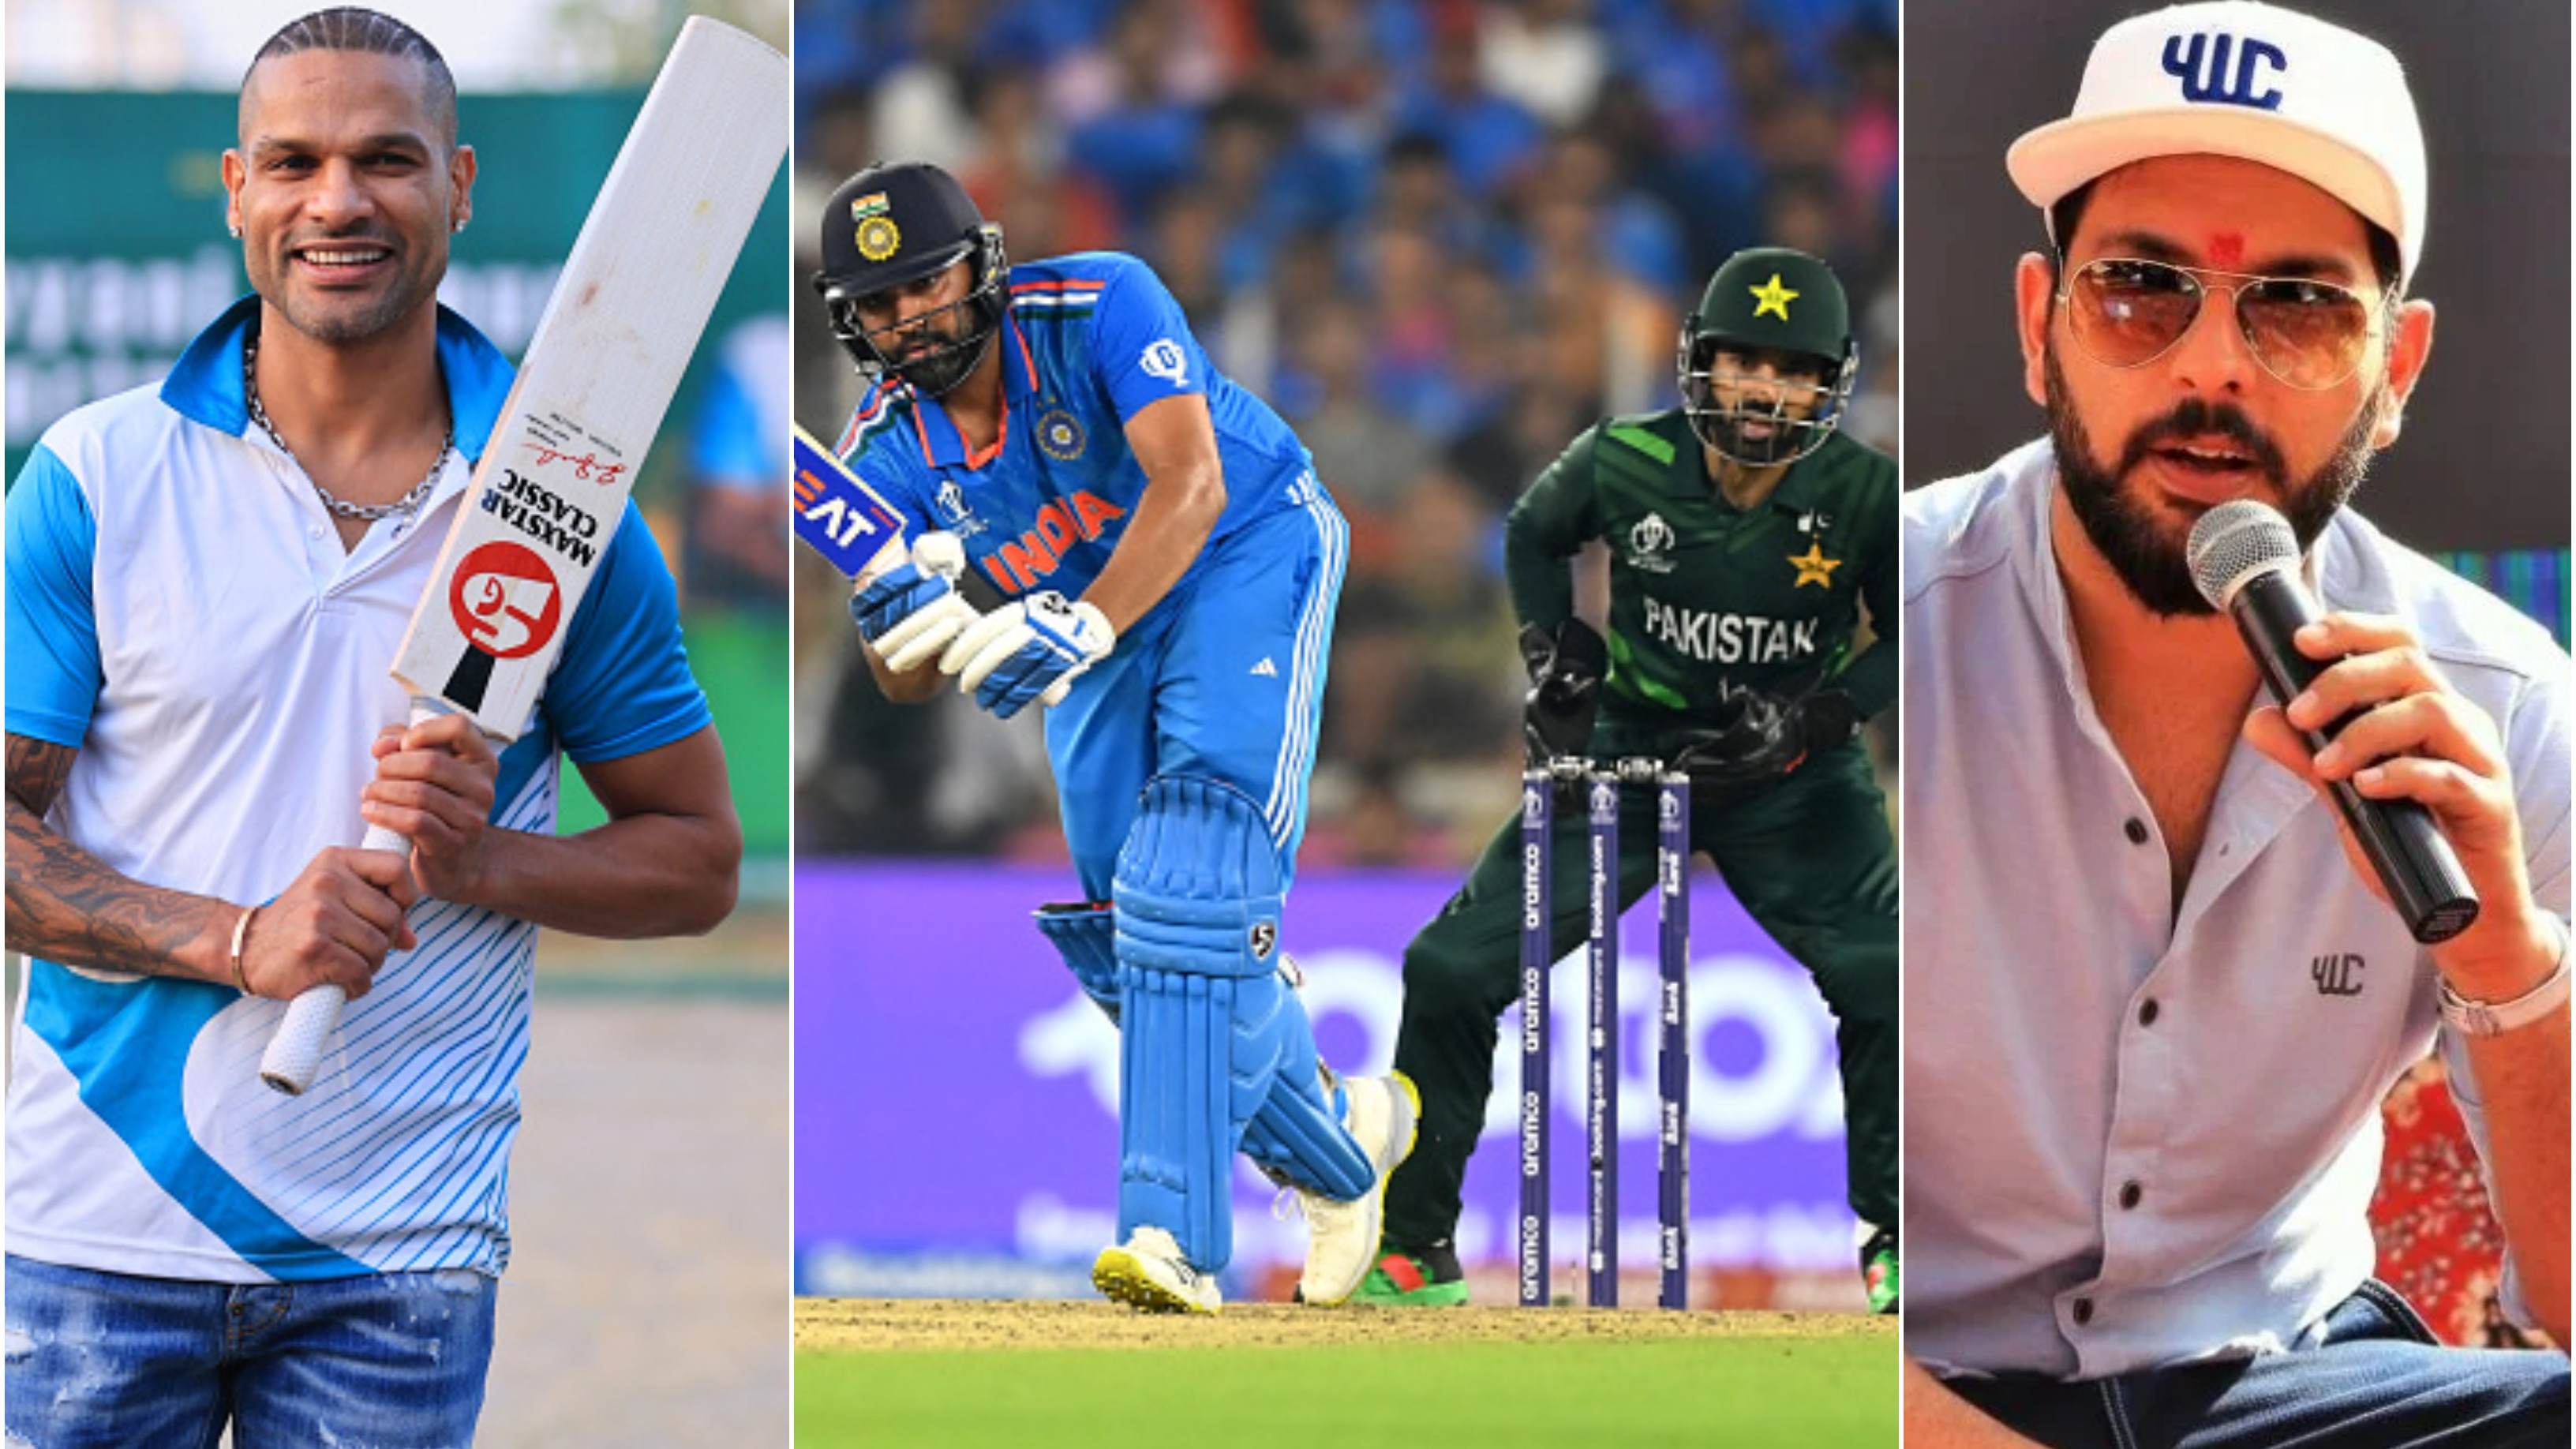 CWC 2023: Cricket fraternity reacts as India make it 8-0 vs Pakistan in World Cup after Rohit and bowlers outclass arch-rivals